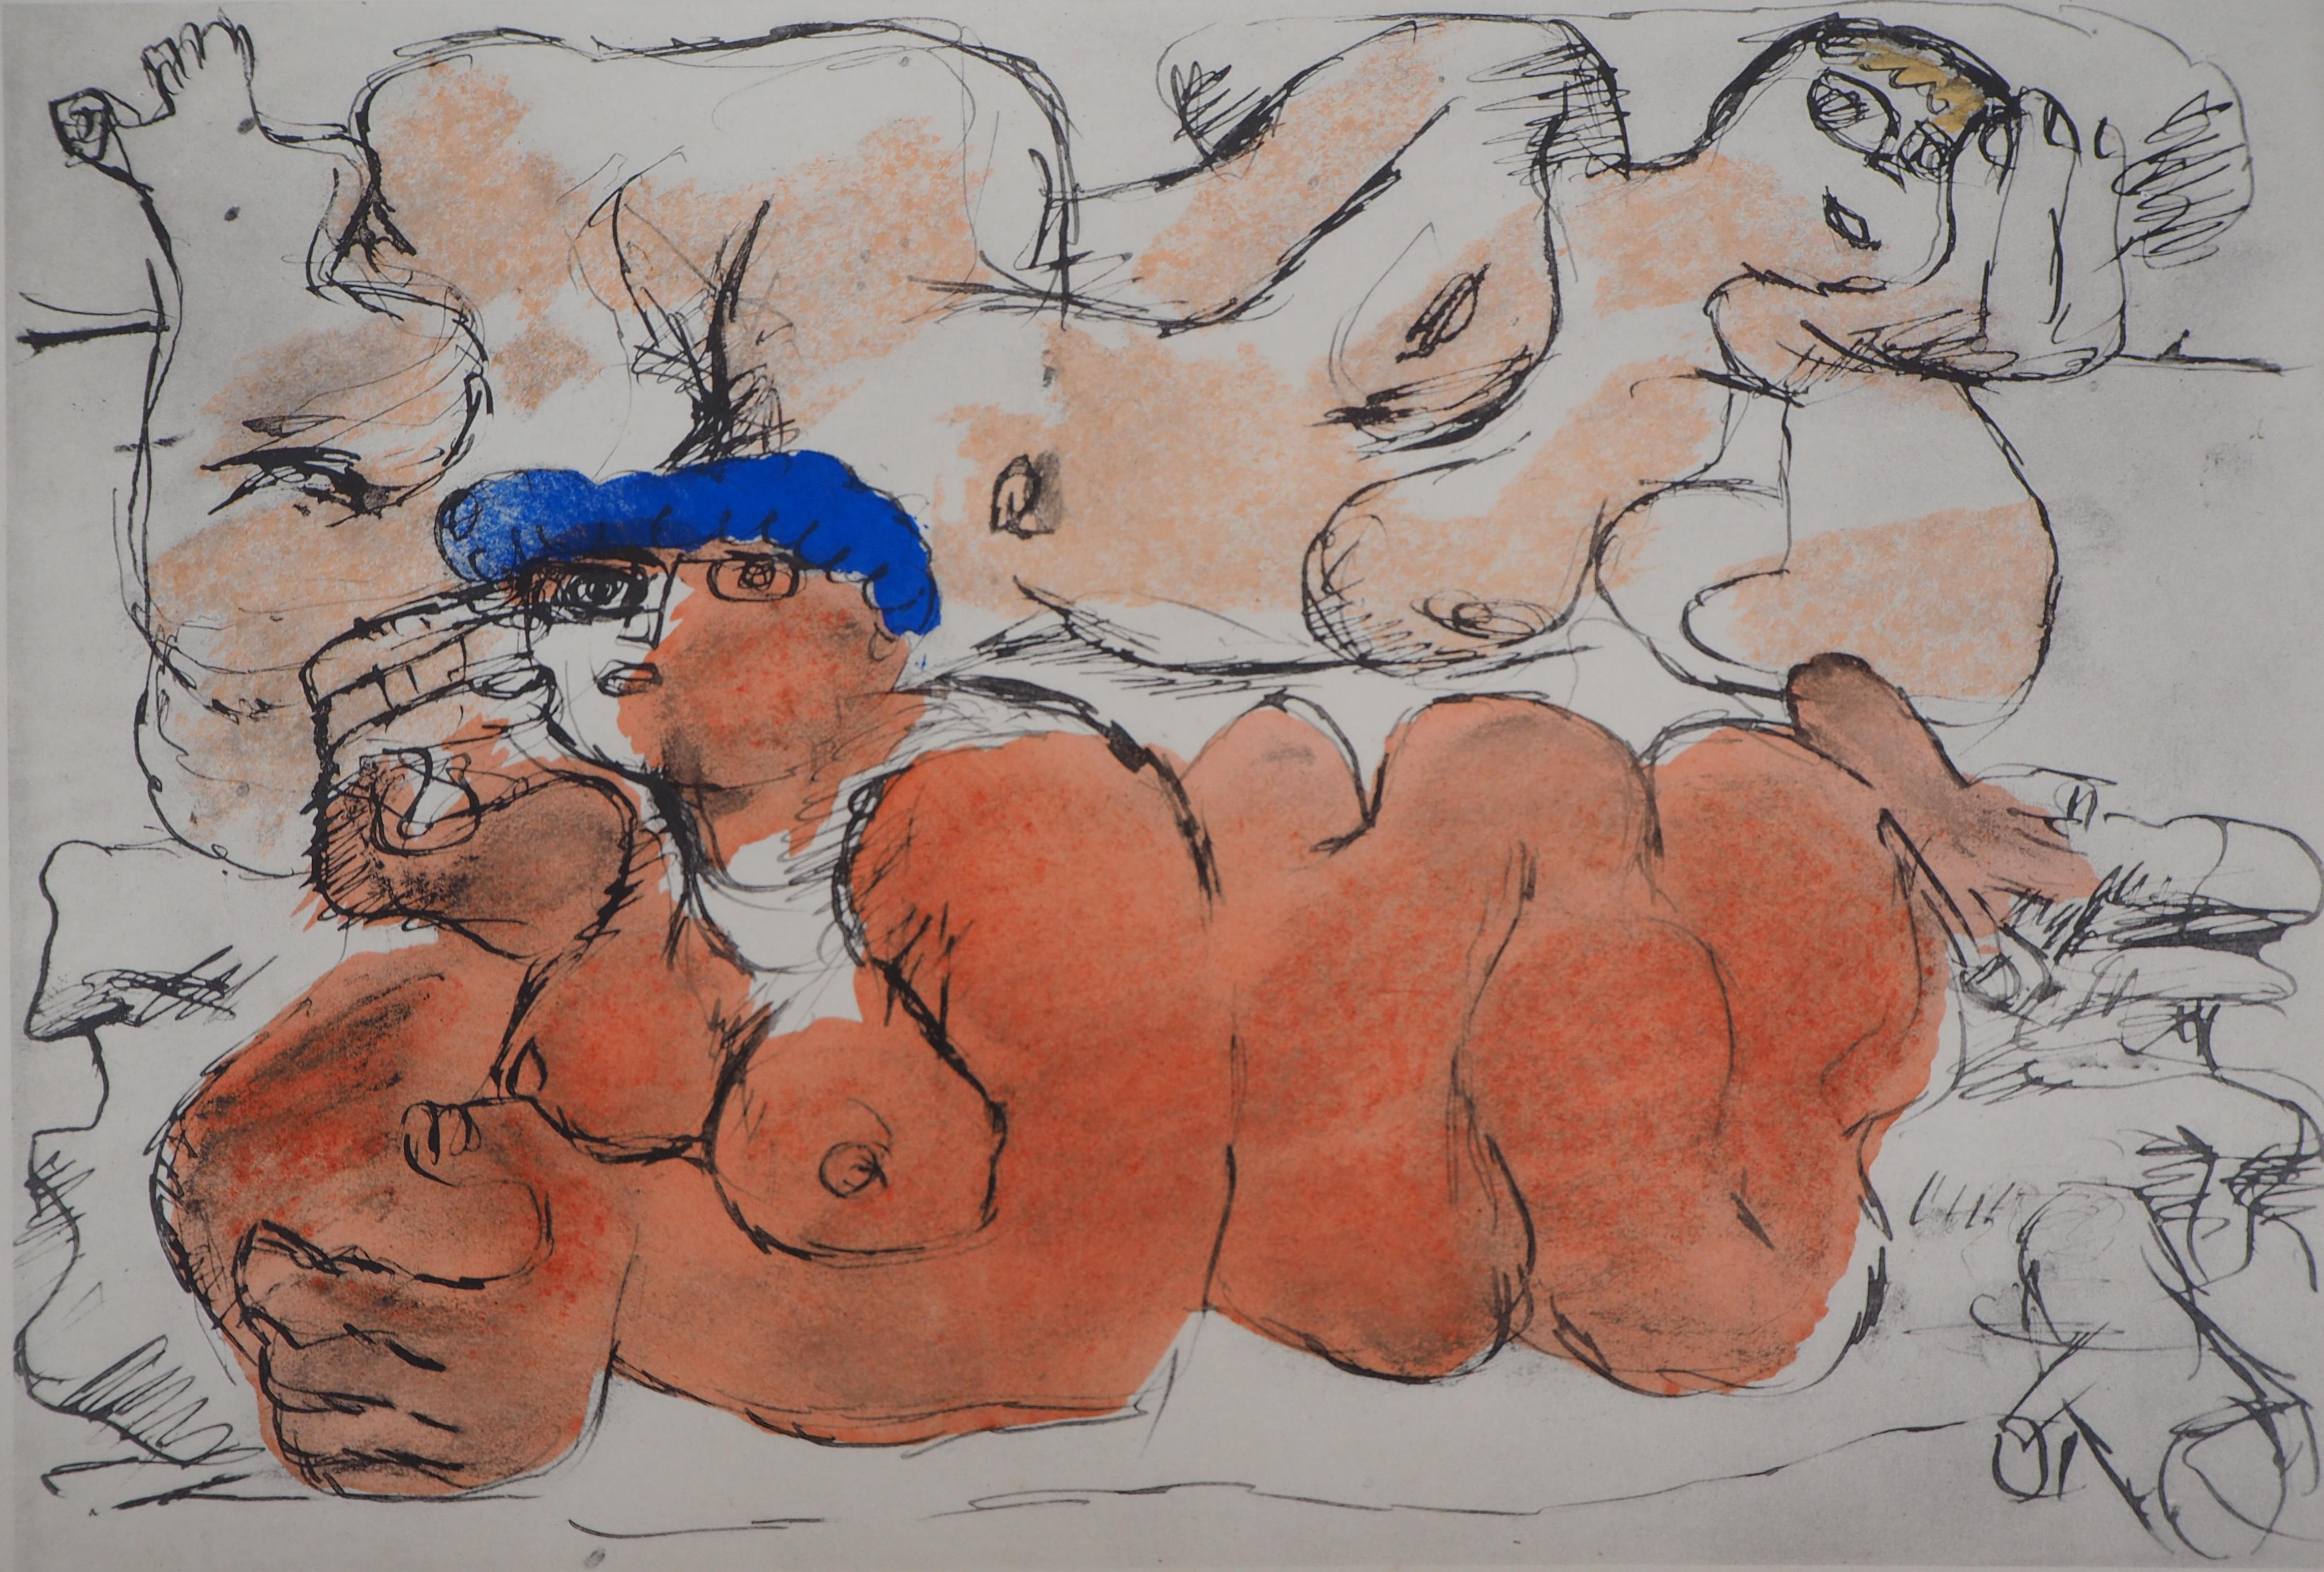 Le Corbusier Nude Print - The Rest, Two Reclining Nudes - Lithograph and watercolor stencil